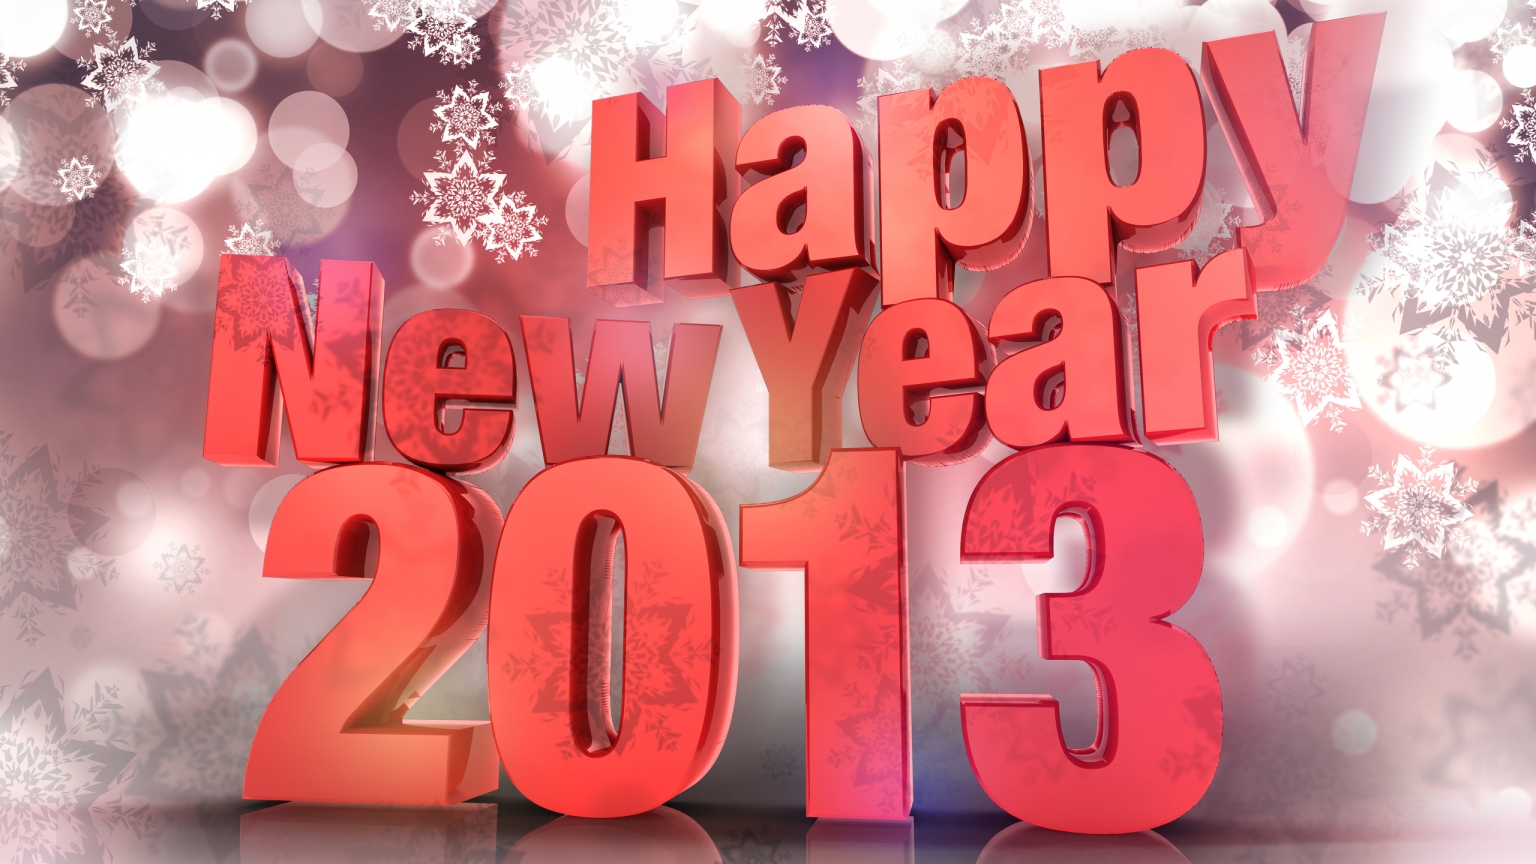 Happy New 2013 for 1536 x 864 HDTV resolution